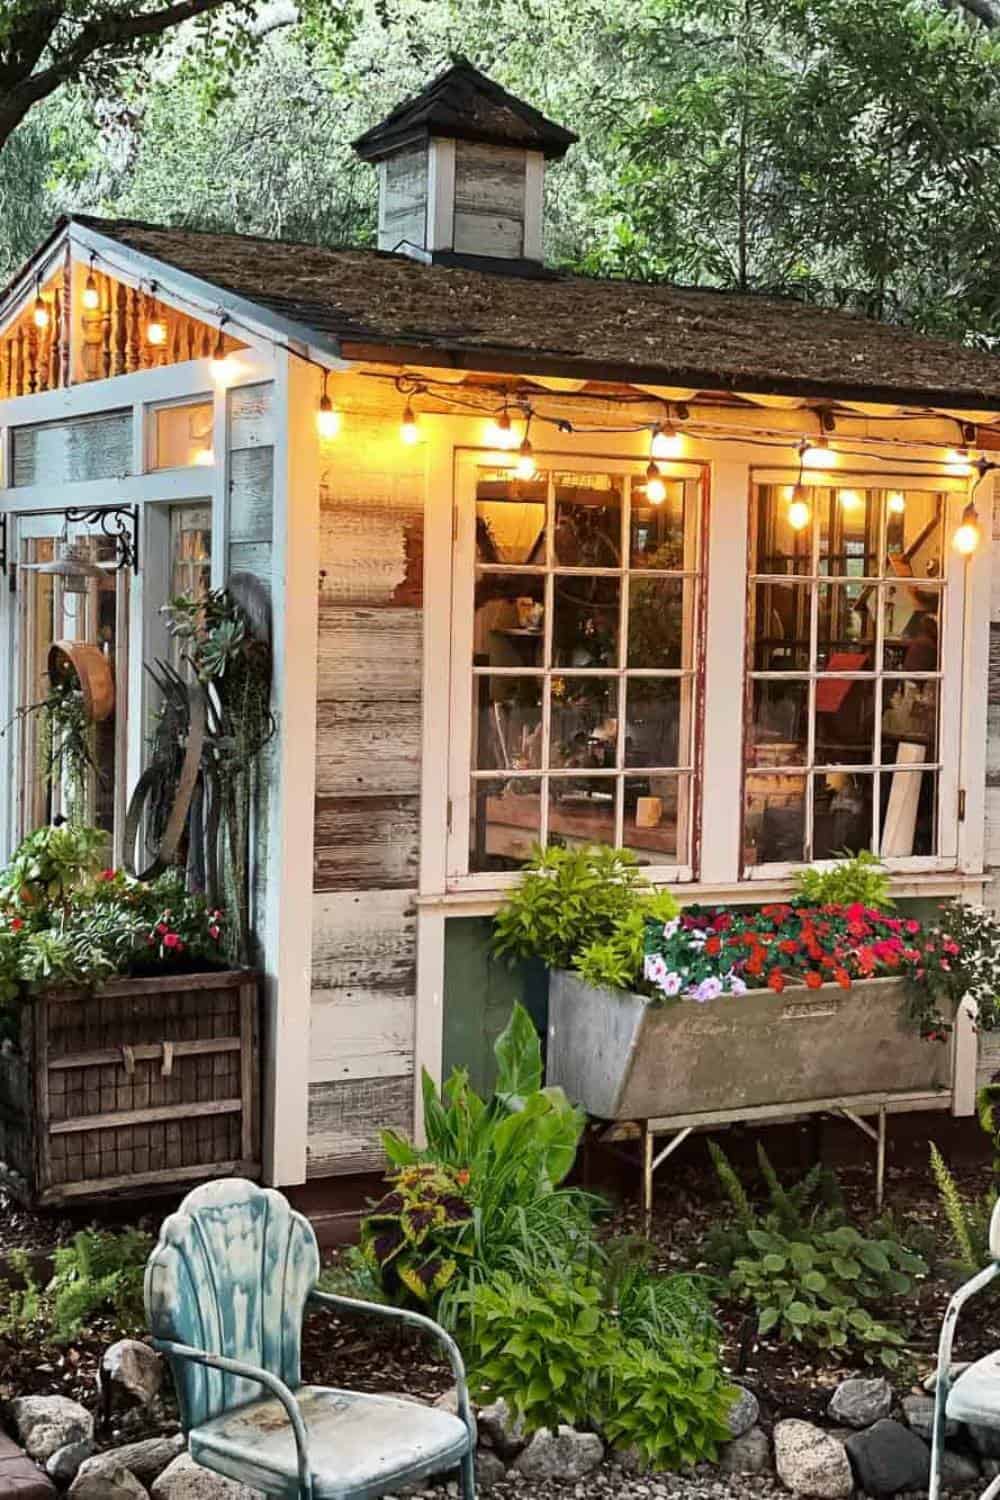 The She Shed lit up at night in the summer with string lights and flowers in planters around the outside